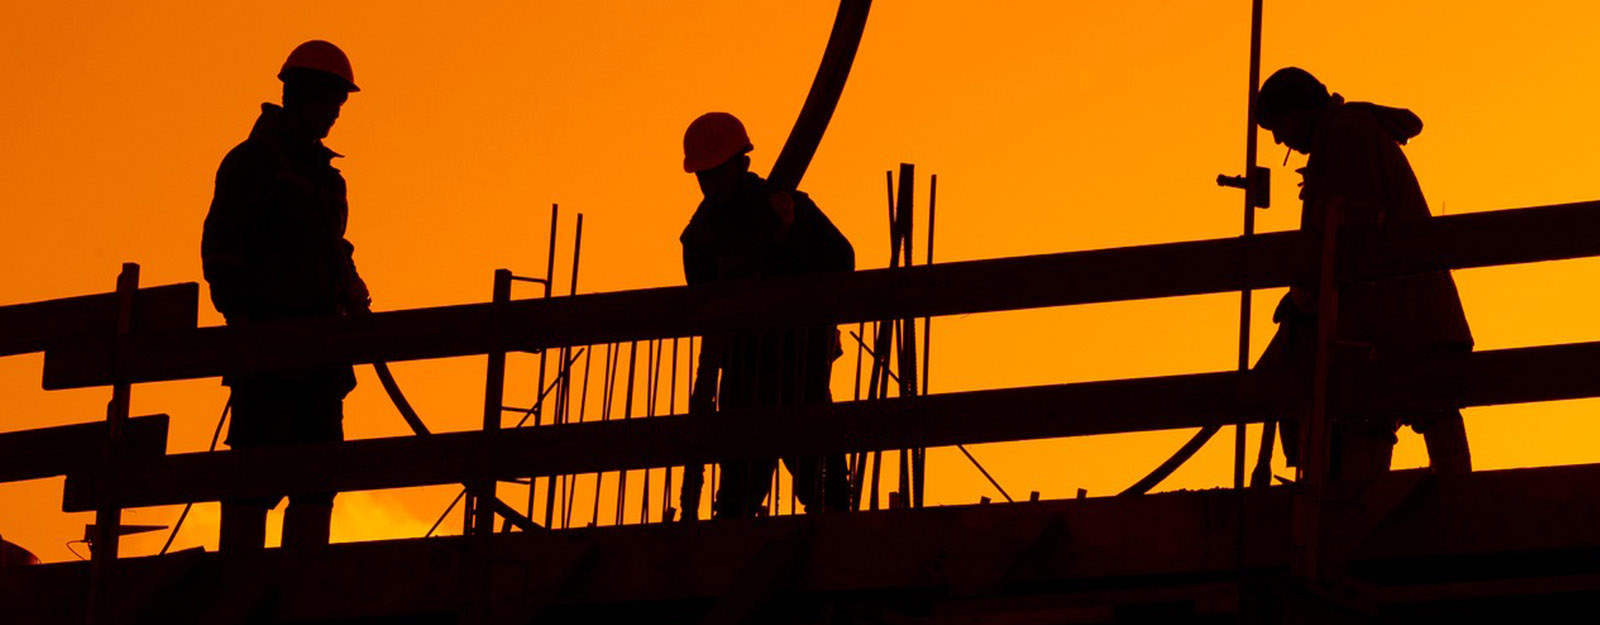 Silhouettes of three construction workers with a sunset in the background. 